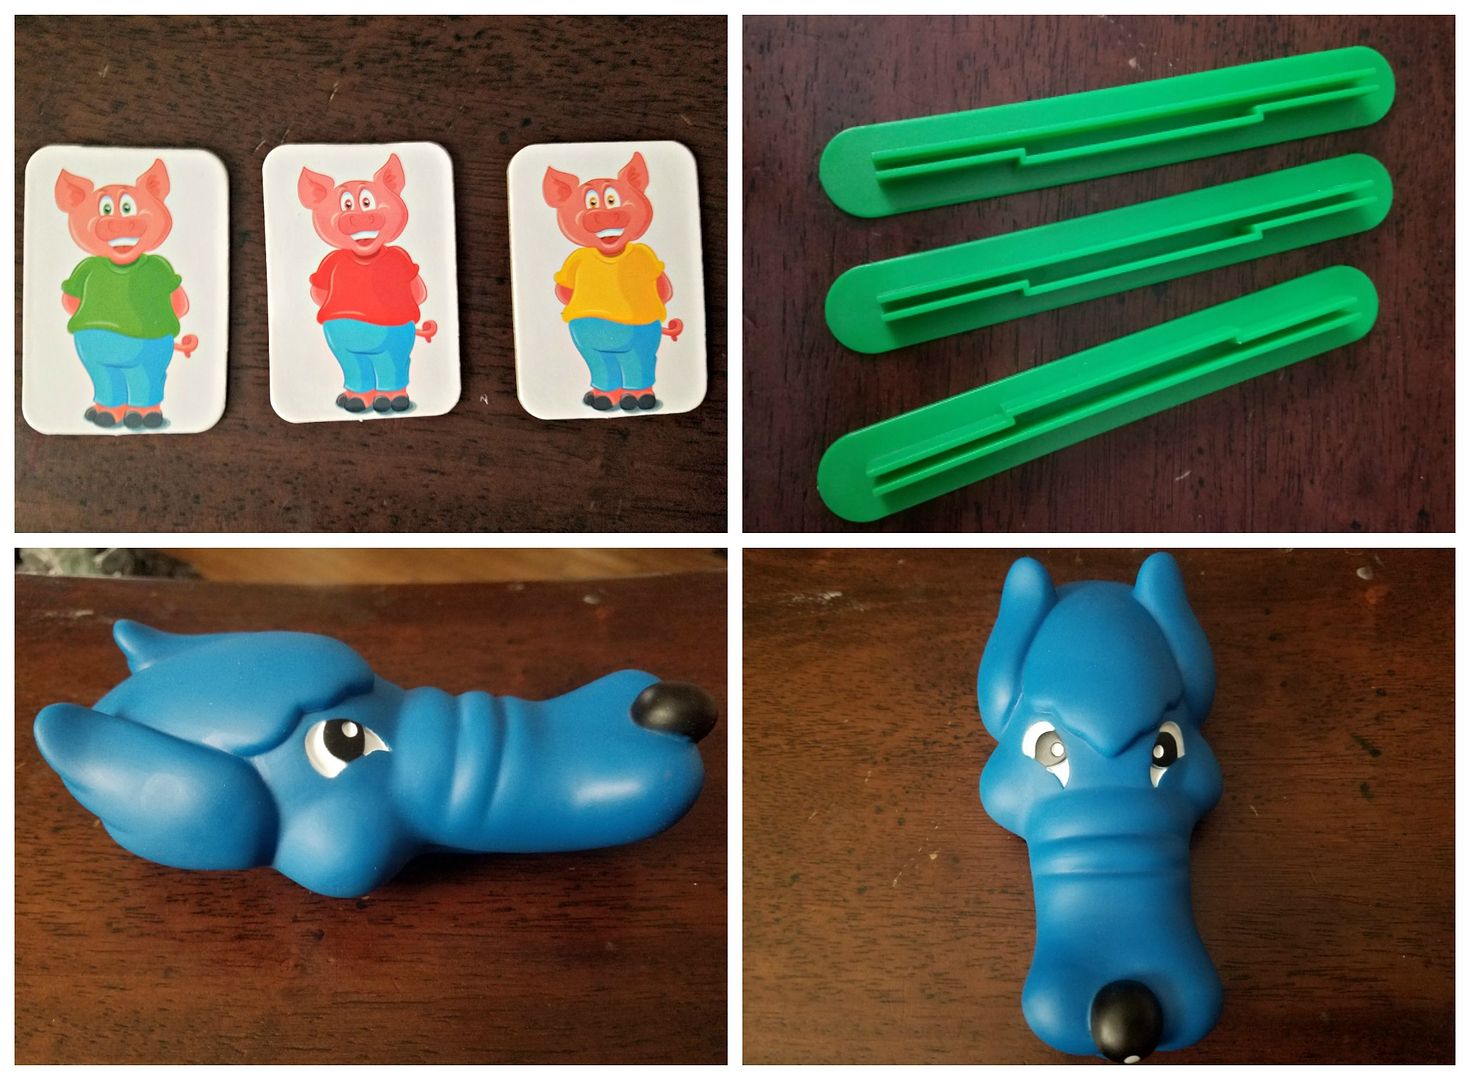 3 little pigs board game